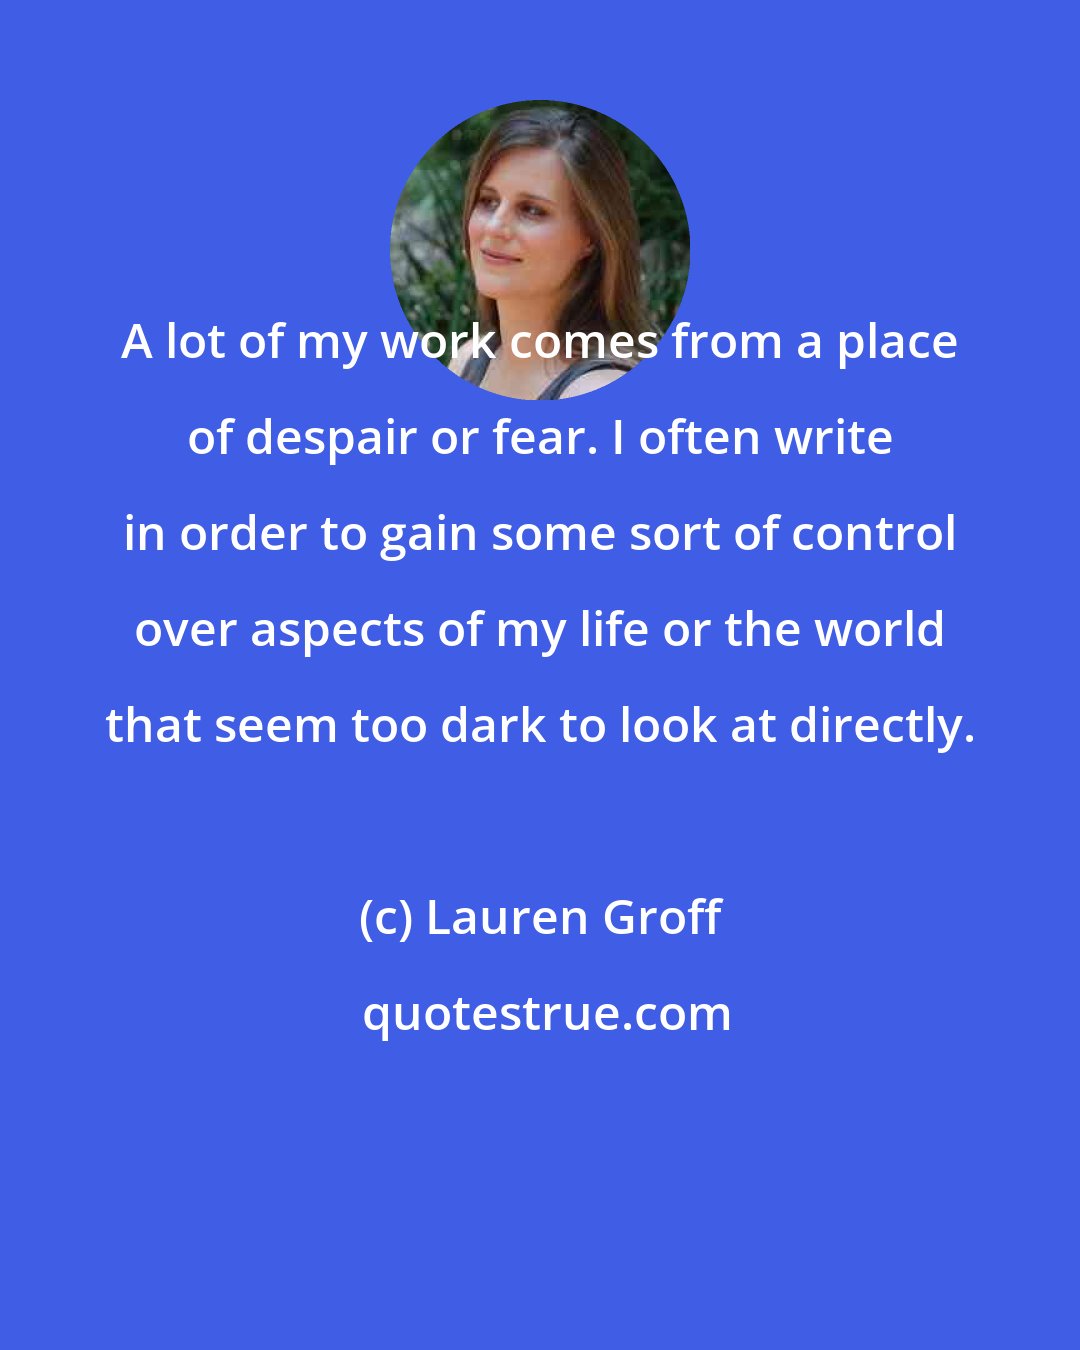 Lauren Groff: A lot of my work comes from a place of despair or fear. I often write in order to gain some sort of control over aspects of my life or the world that seem too dark to look at directly.